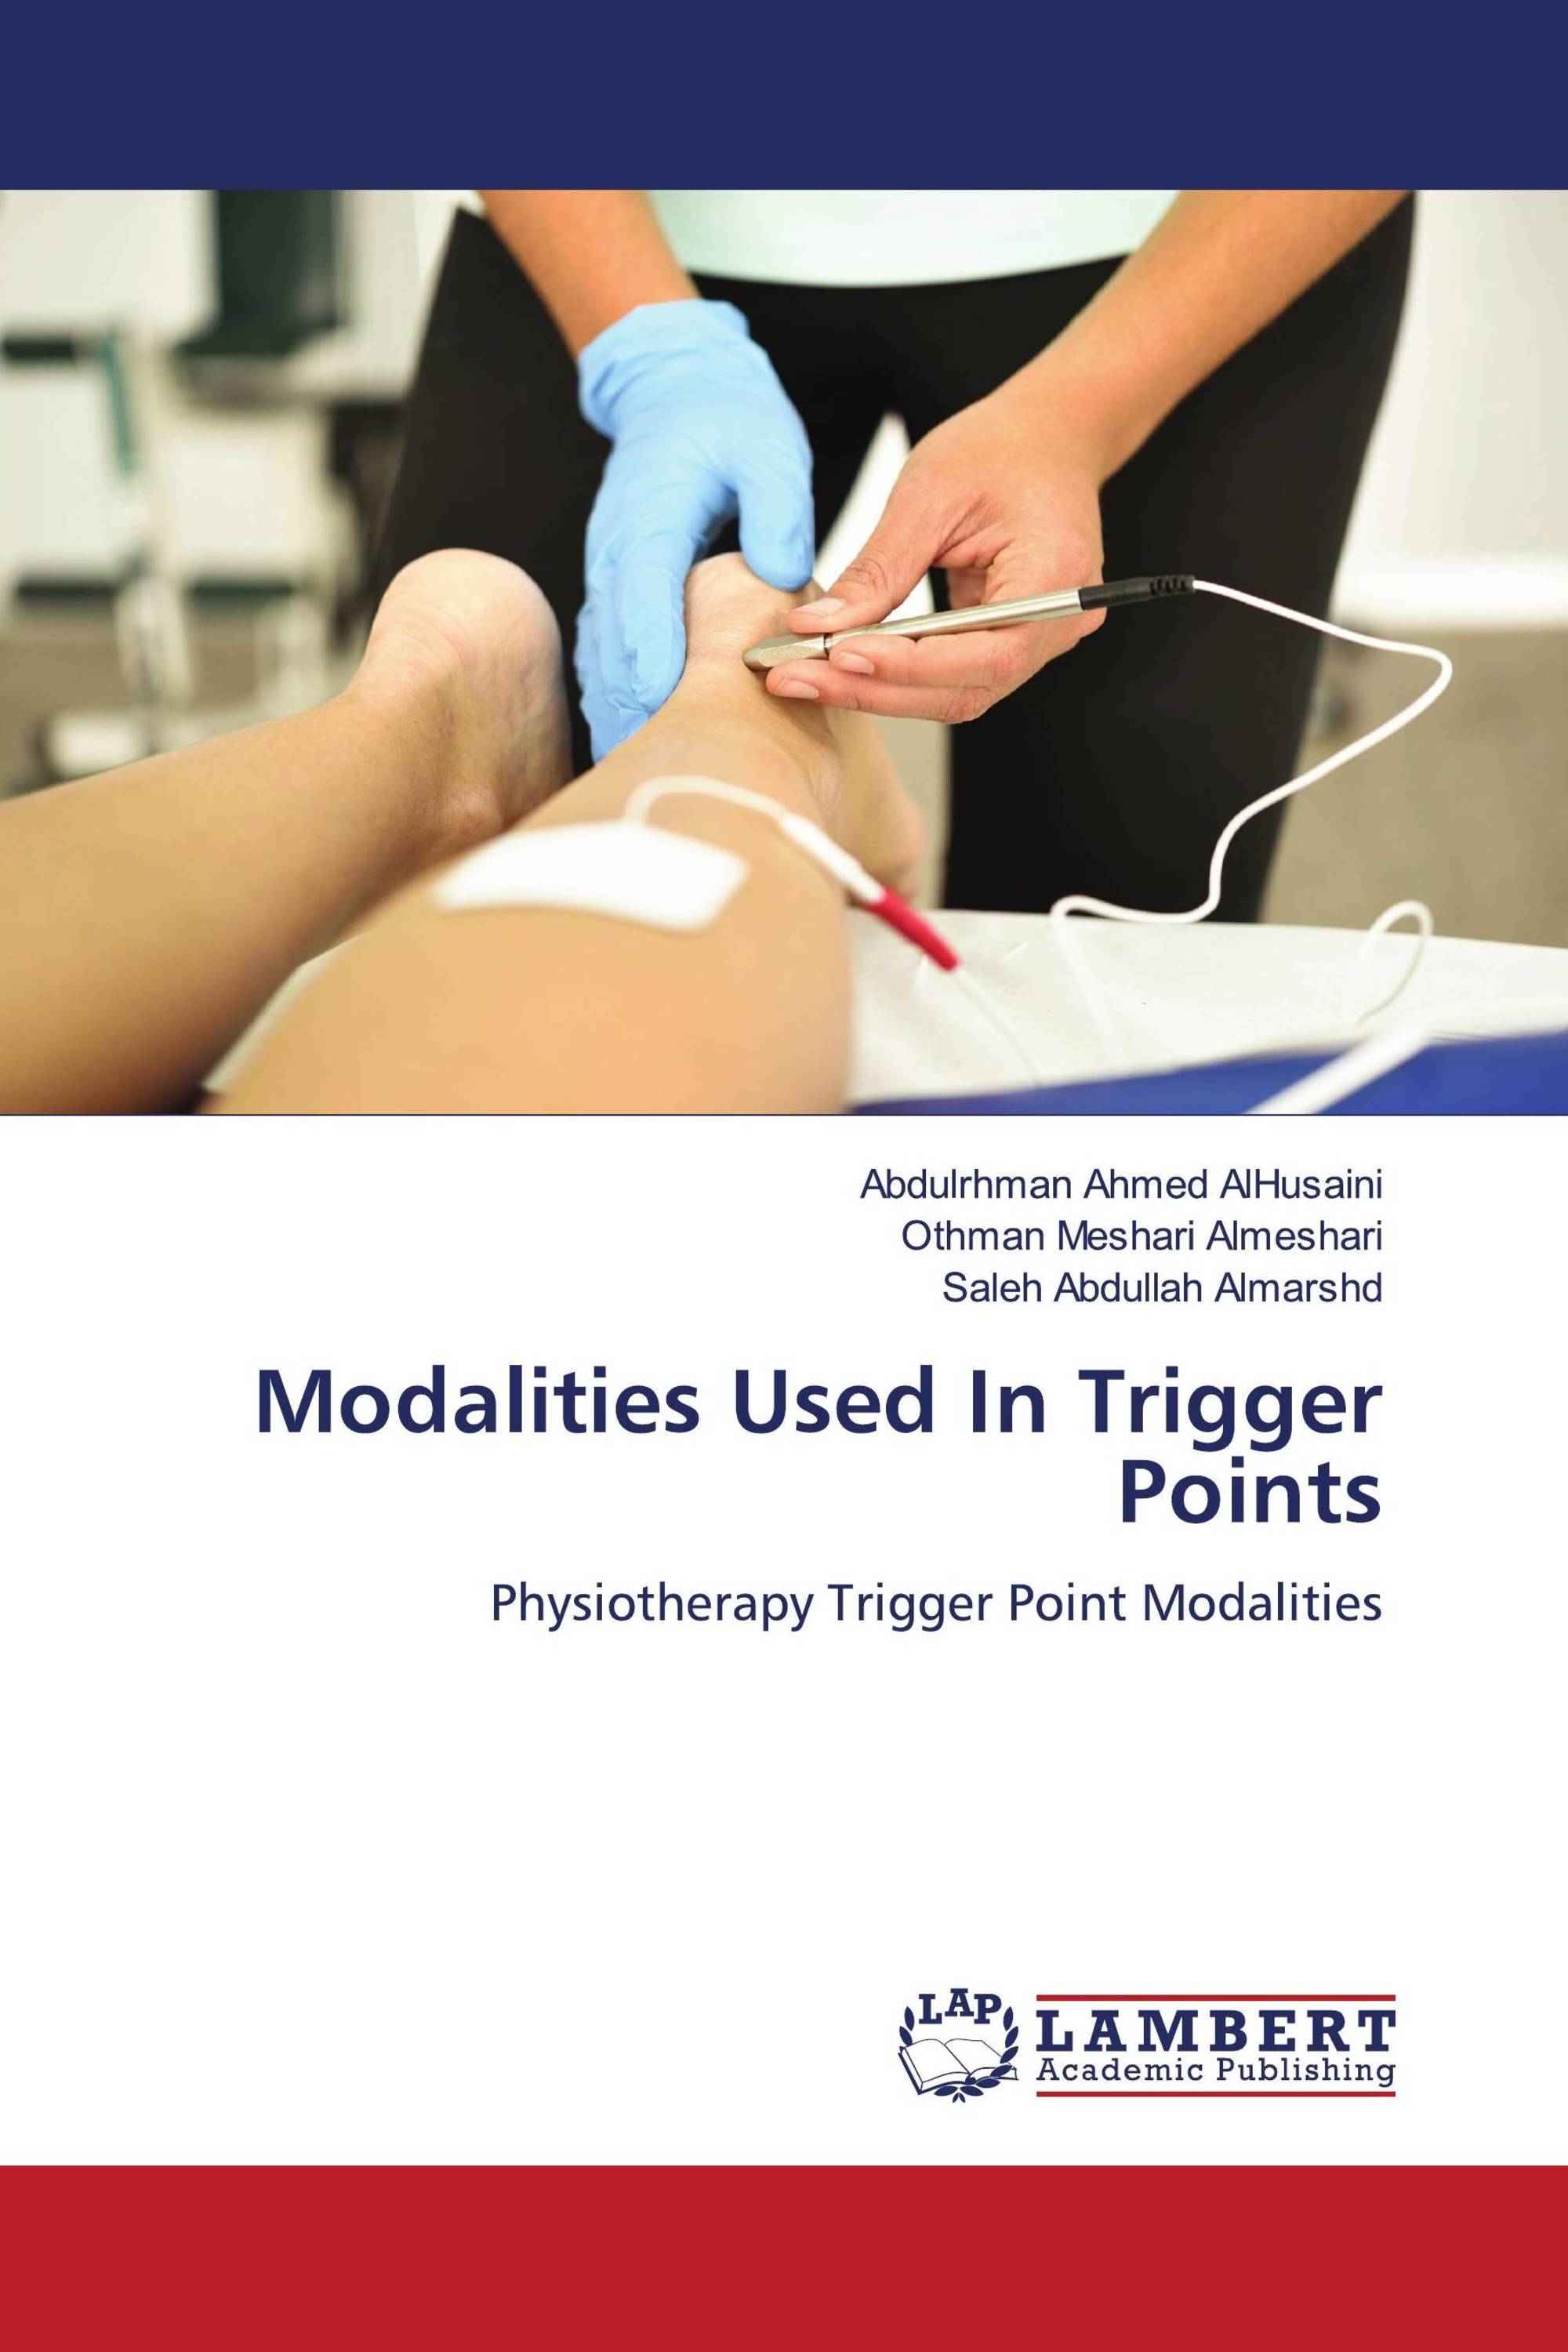 Modalities Used In Trigger Points